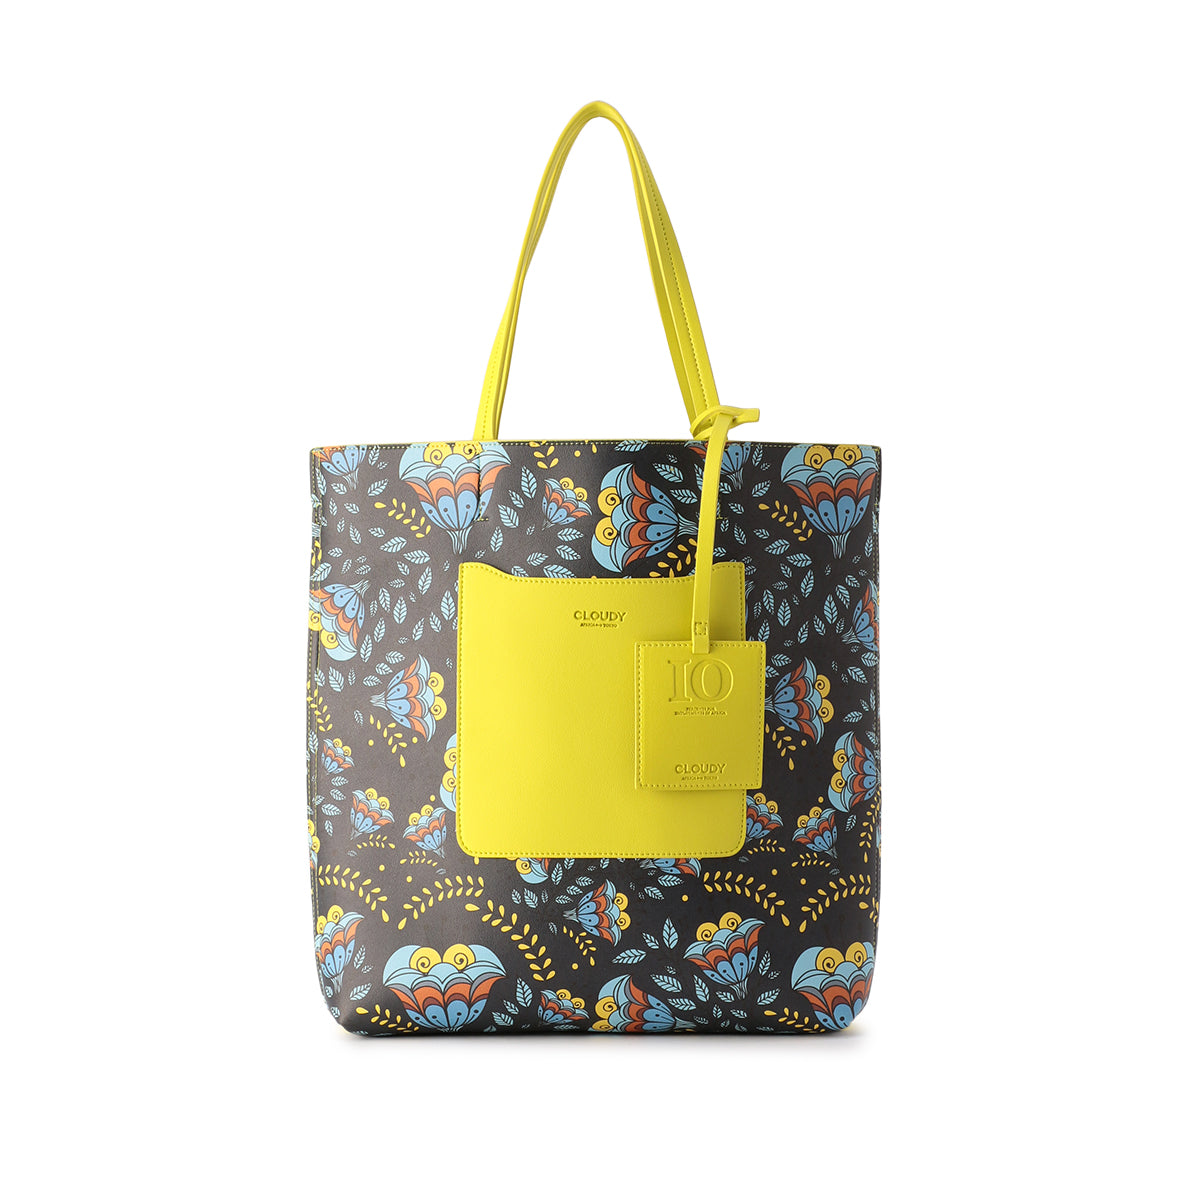 Fake Leather Printed Tote Bag (Large) YELLOW| バッグ | CLOUDY 